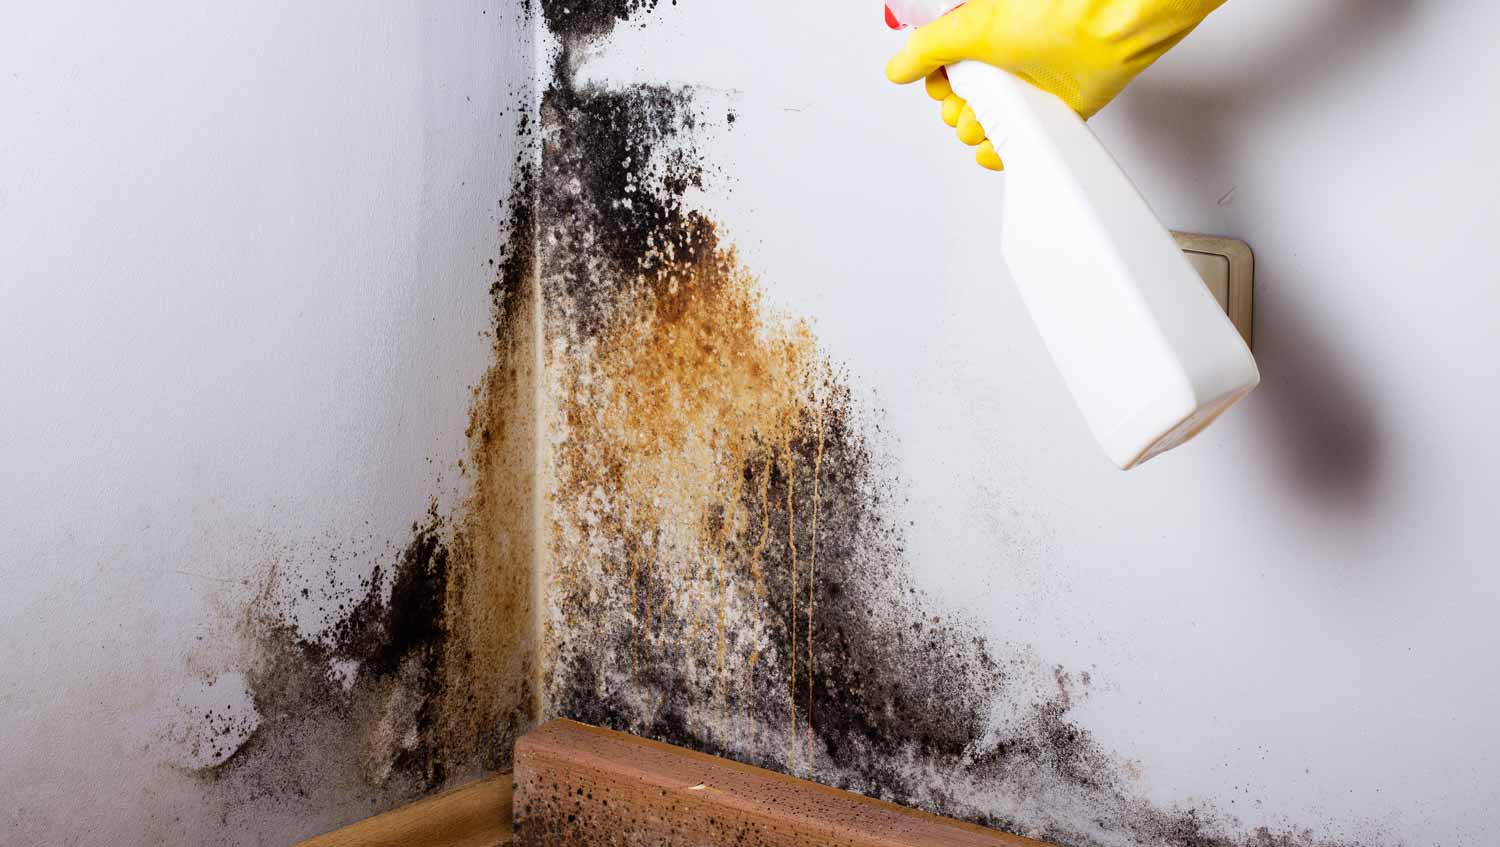 mold testing mold remediation Raleigh NC mold removal mold damage repair